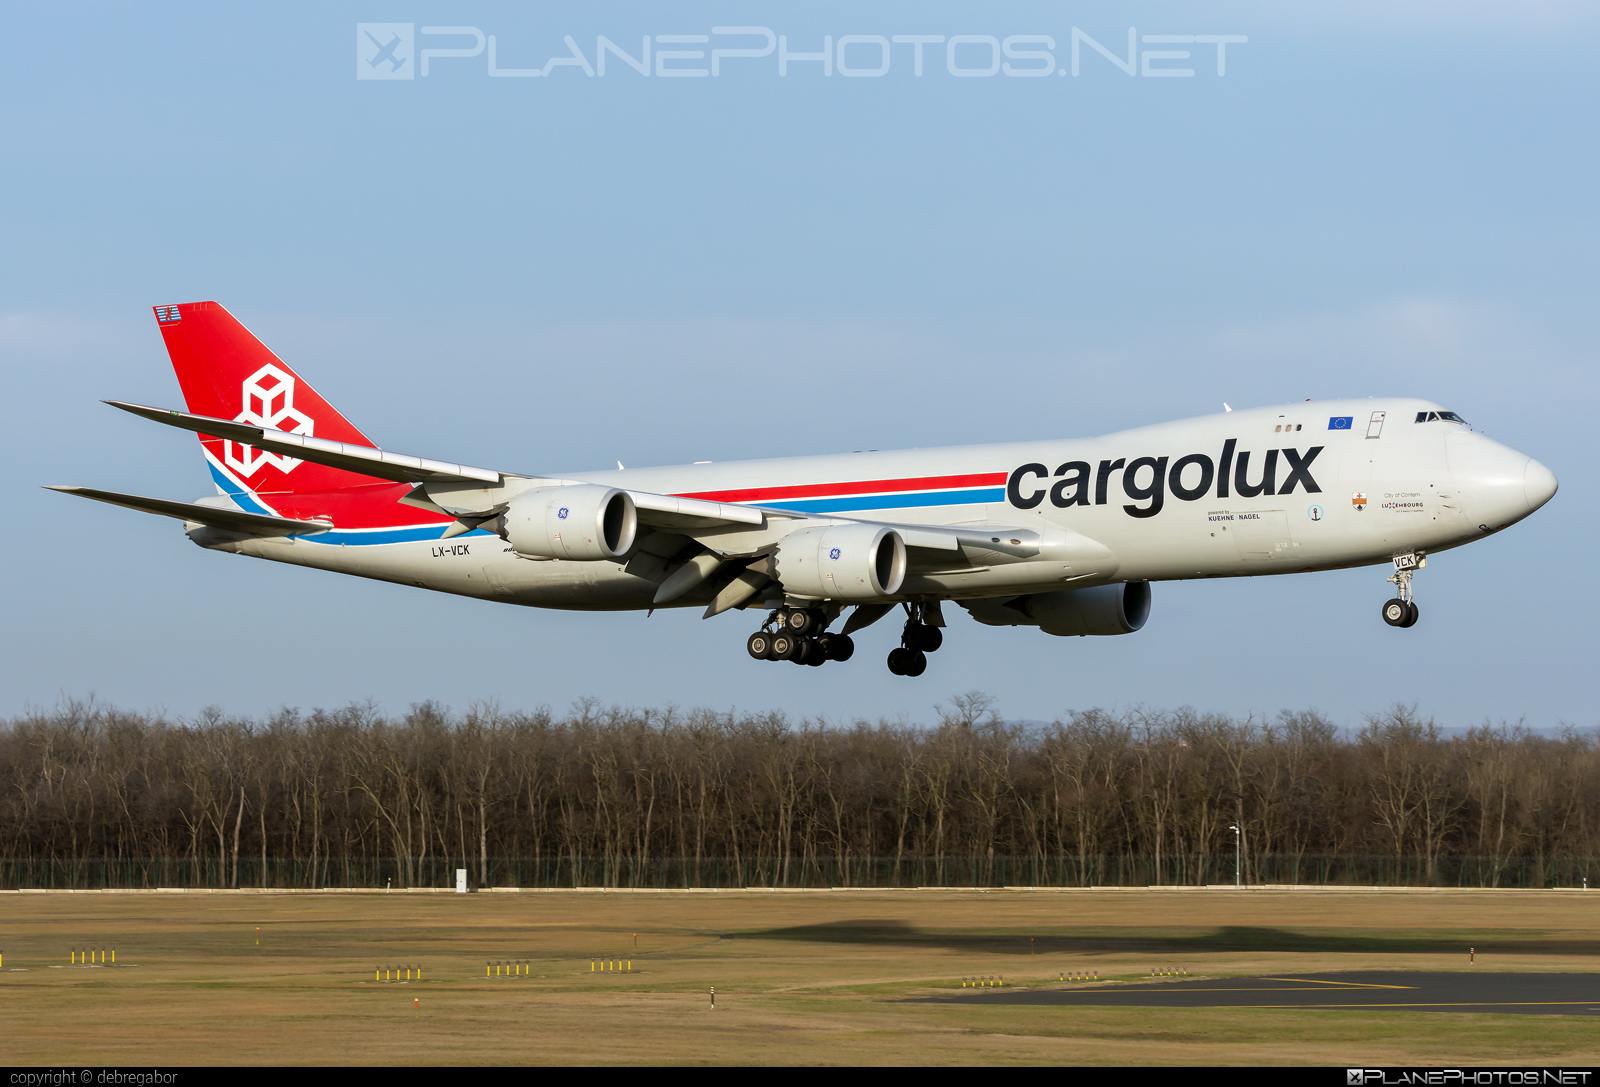 Boeing 747-8F - LX-VCK operated by Cargolux Airlines International #b747 #b747f #b747freighter #boeing #boeing747 #cargolux #jumbo